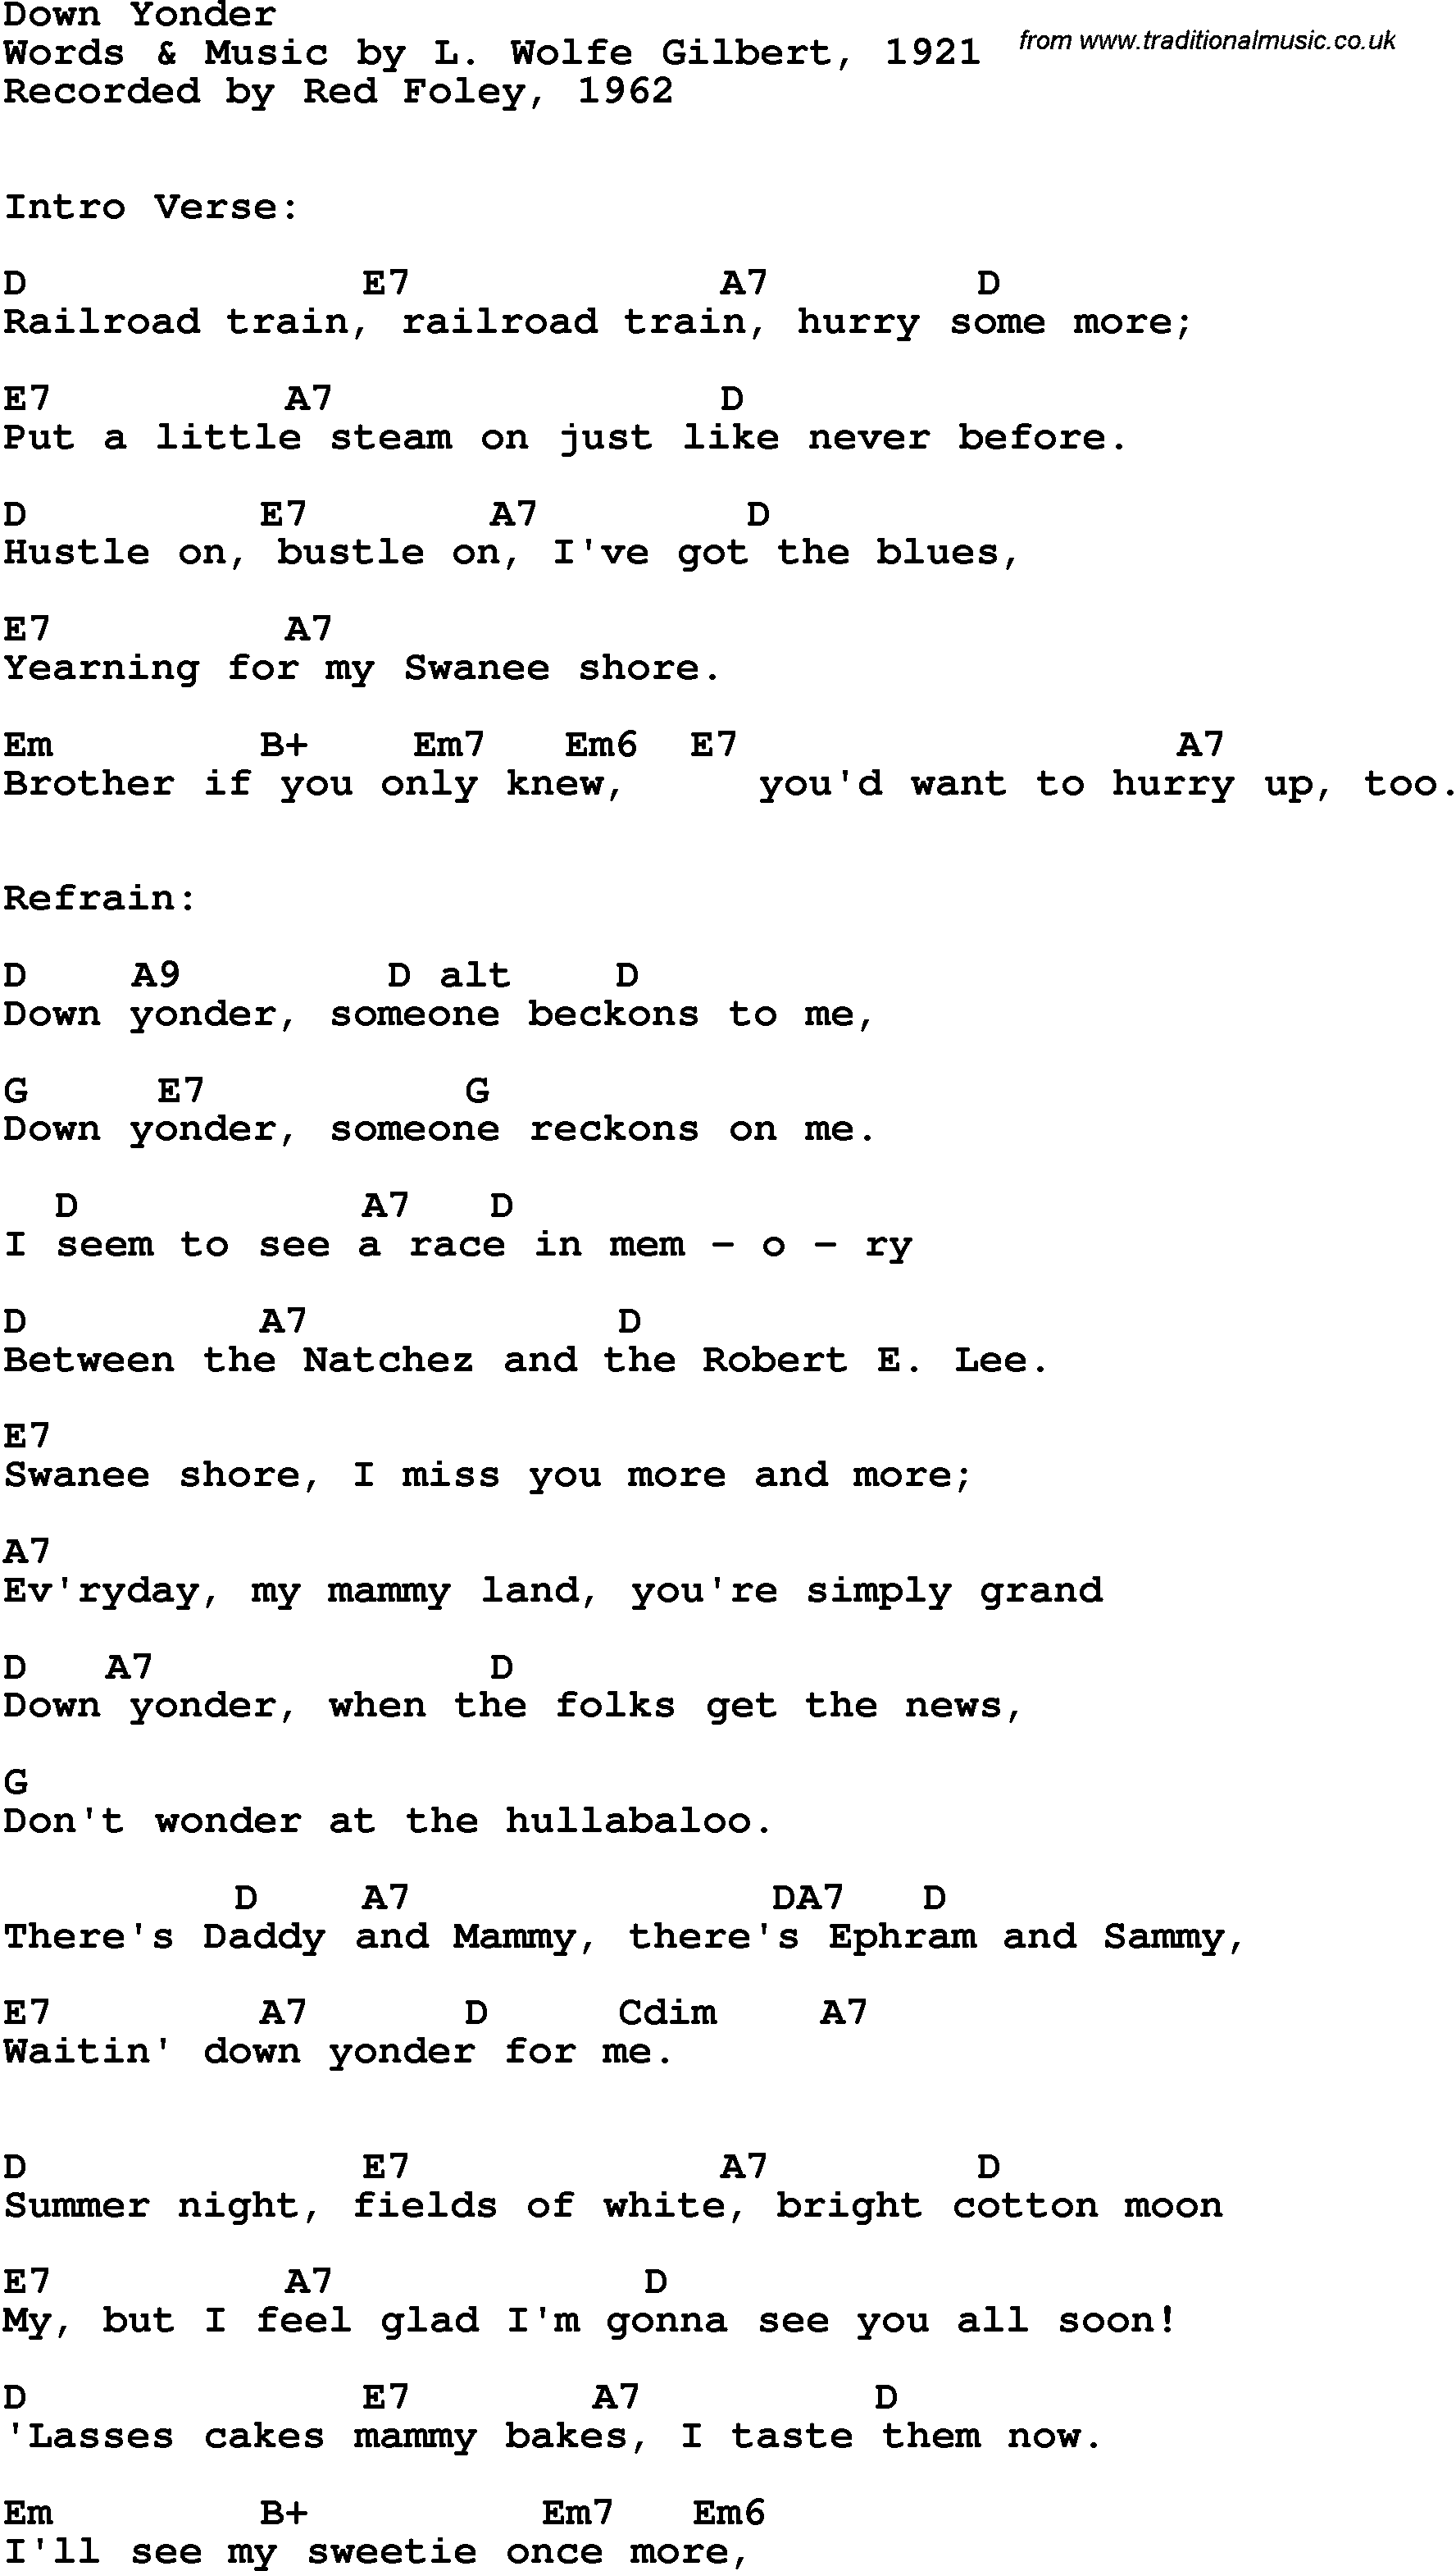 Song Lyrics with guitar chords for Down Yonder - Red Foley, 1962